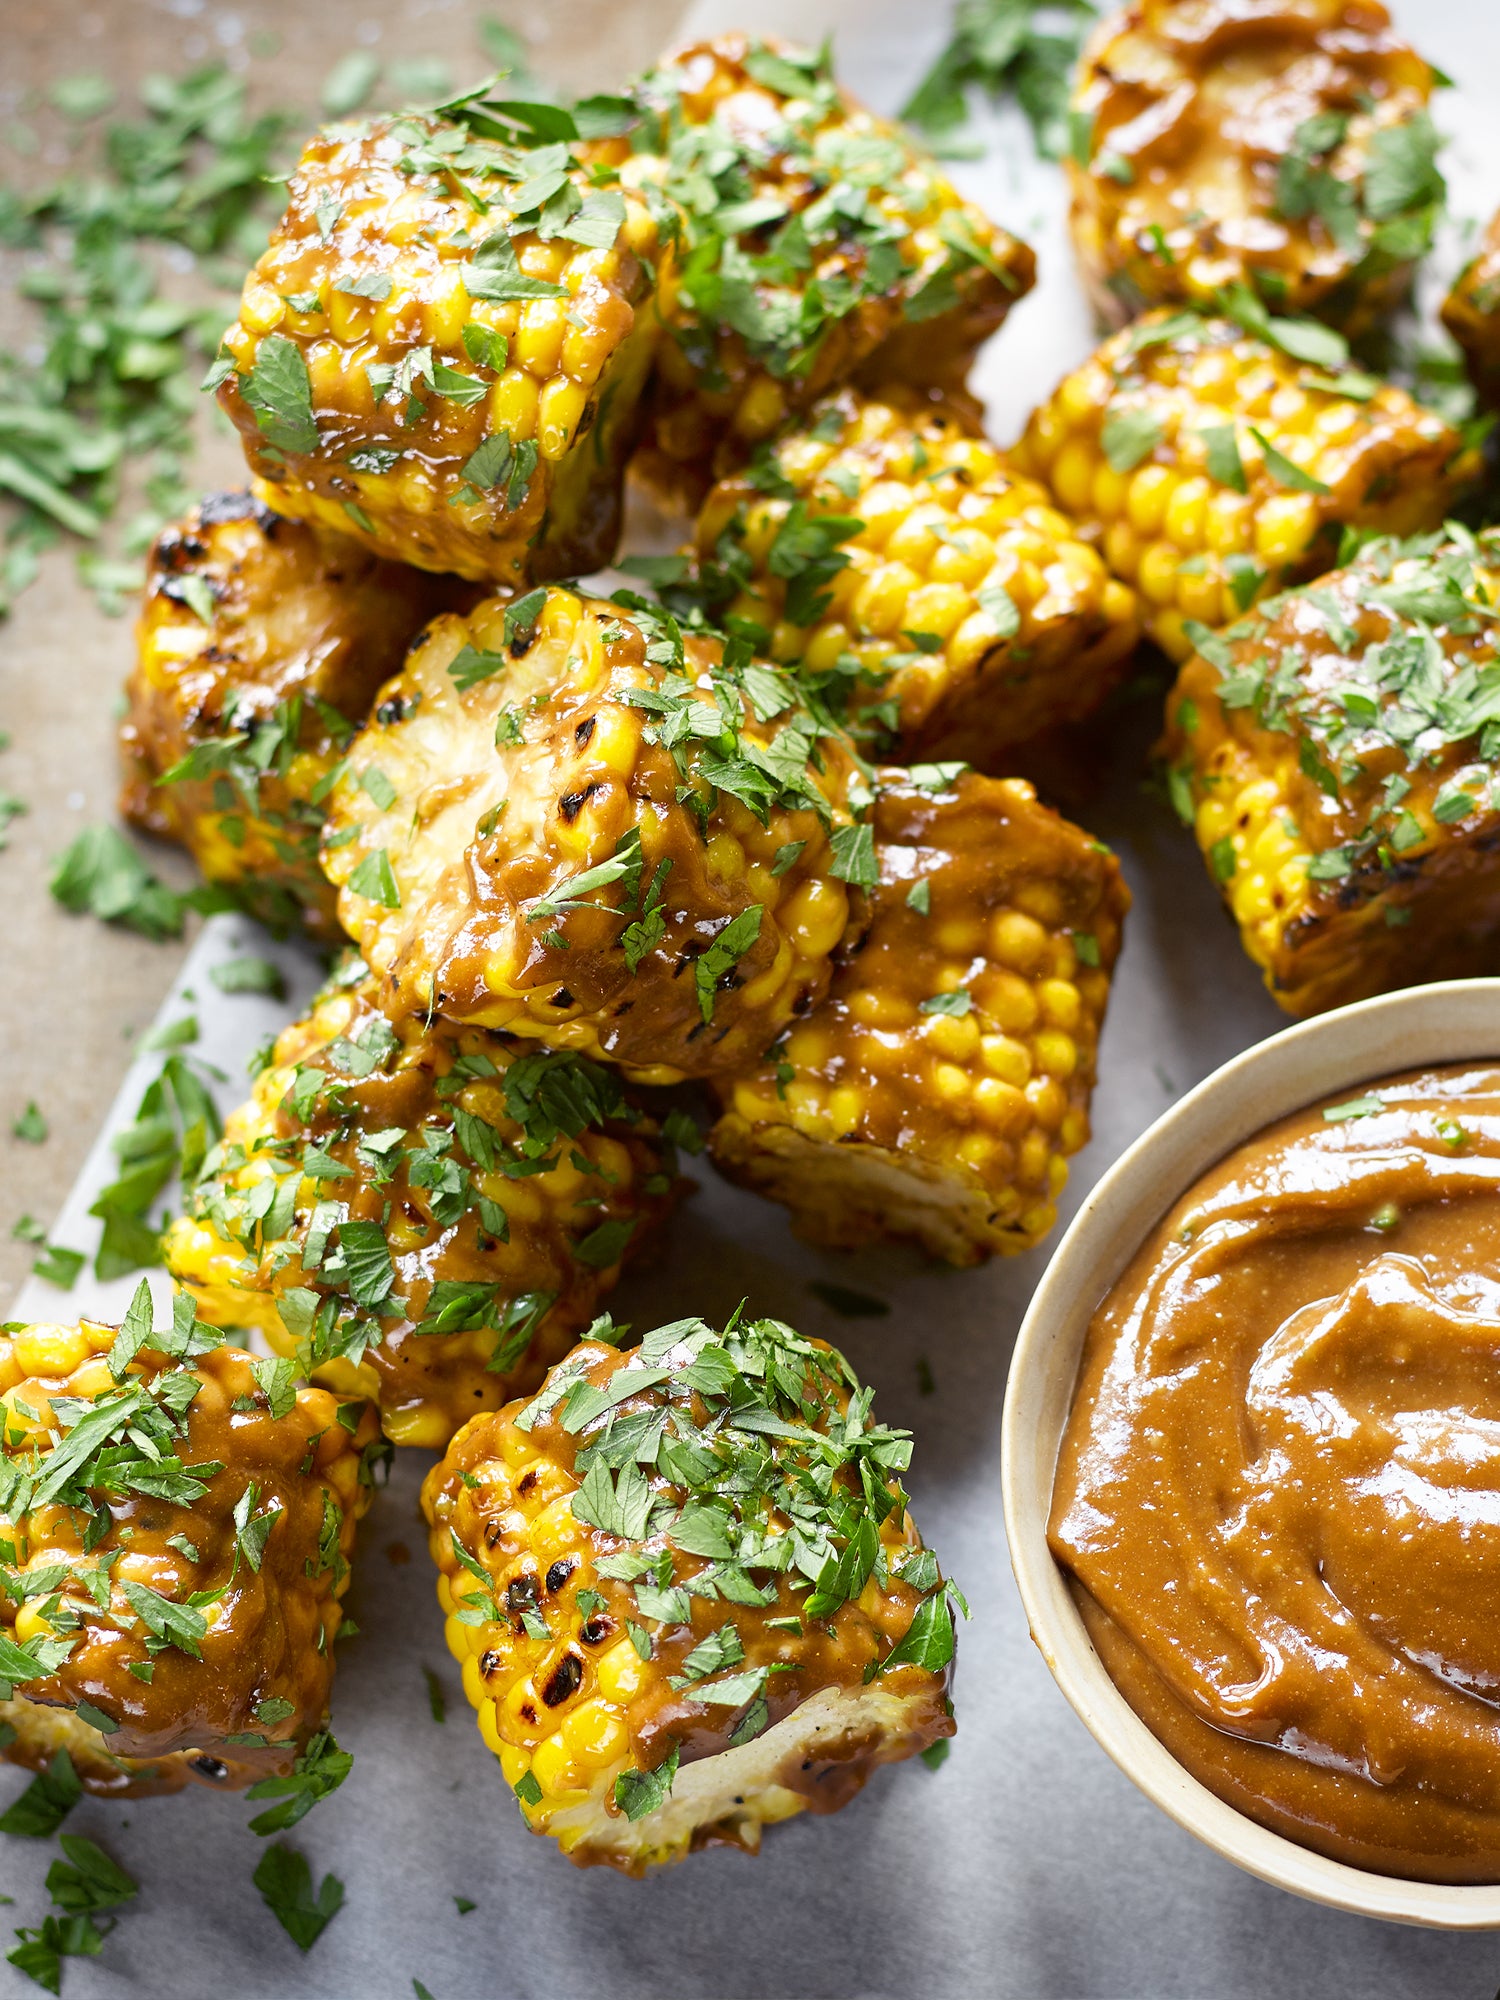 Grilled corn on the cob with miso mayonnaise